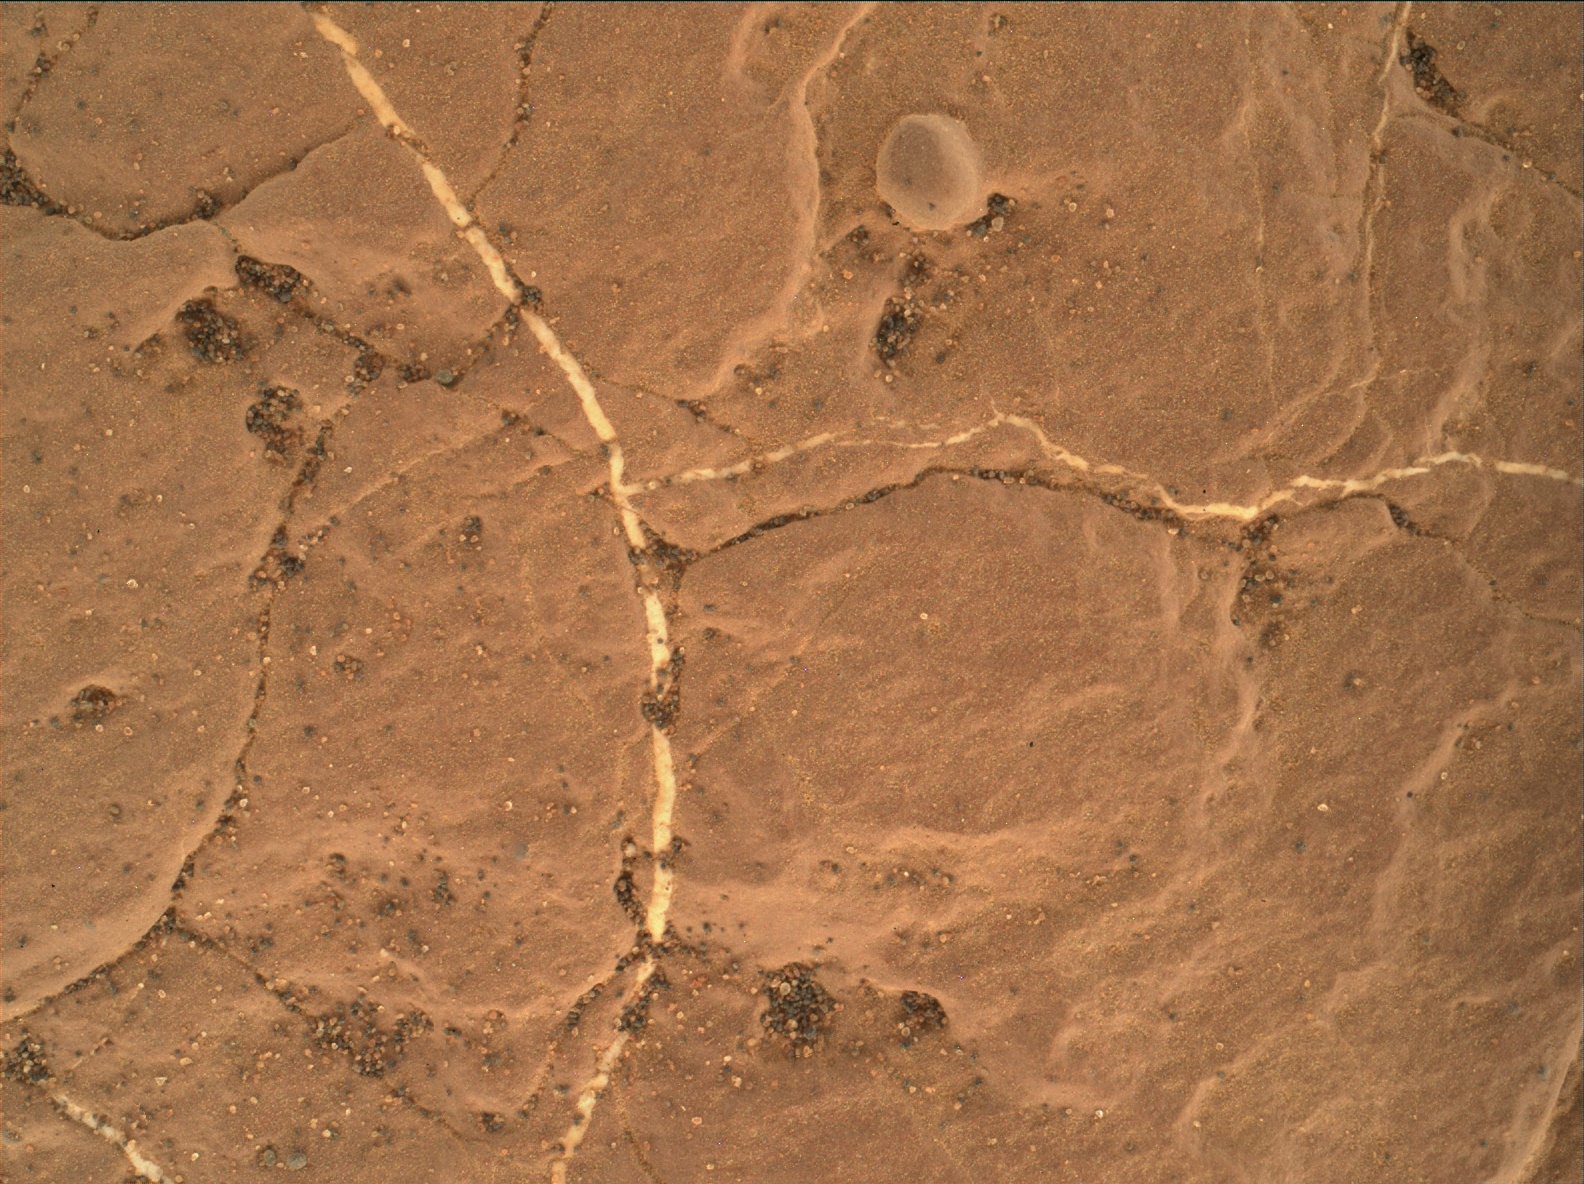 Nasa's Mars rover Curiosity acquired this image using its Mars Hand Lens Imager (MAHLI) on Sol 1589